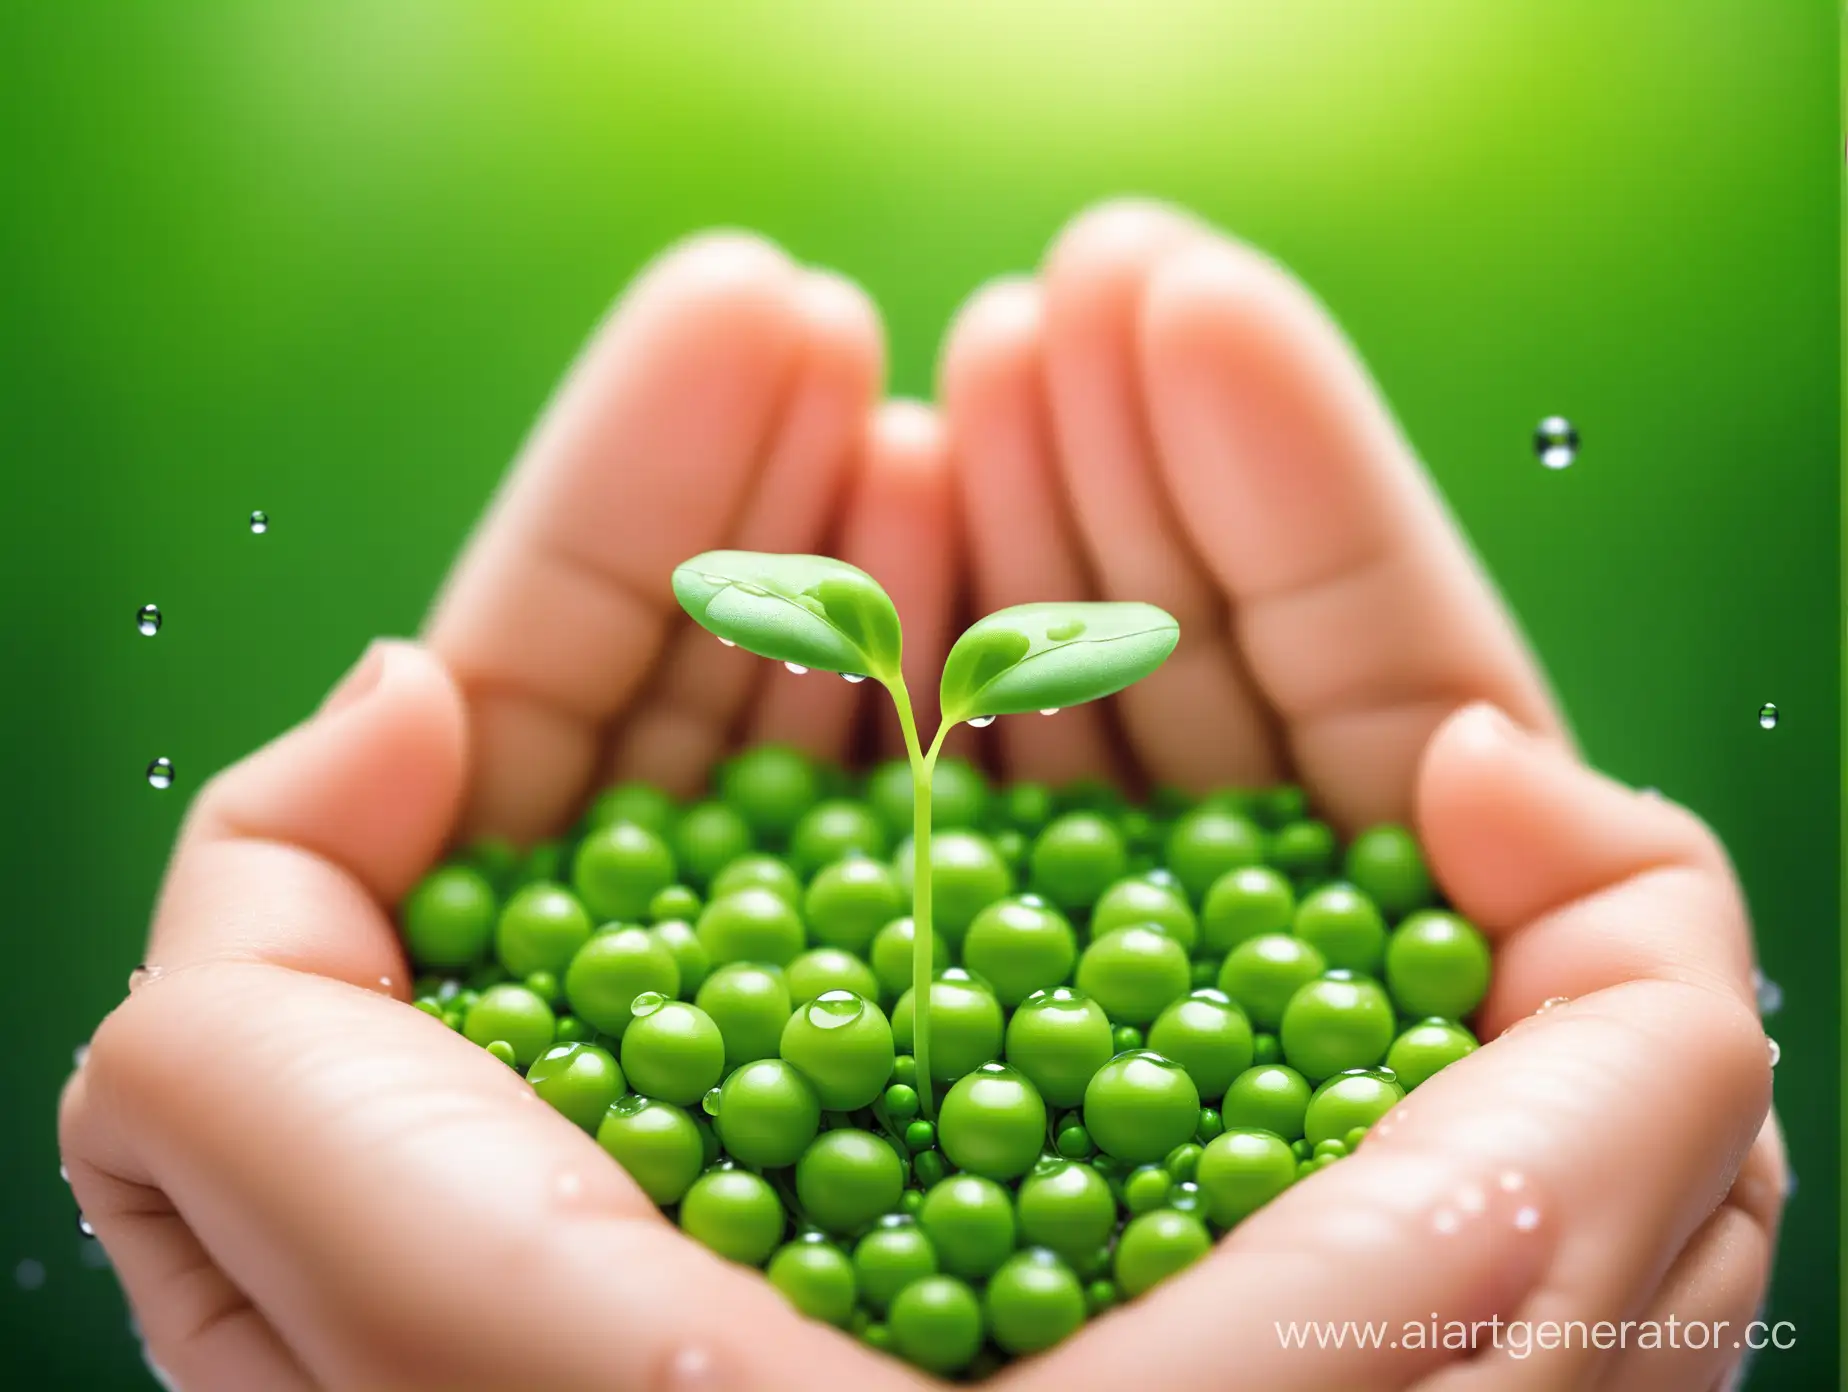 Fresh-Pea-Microgreen-Sprout-with-Dripping-Water-Droplets